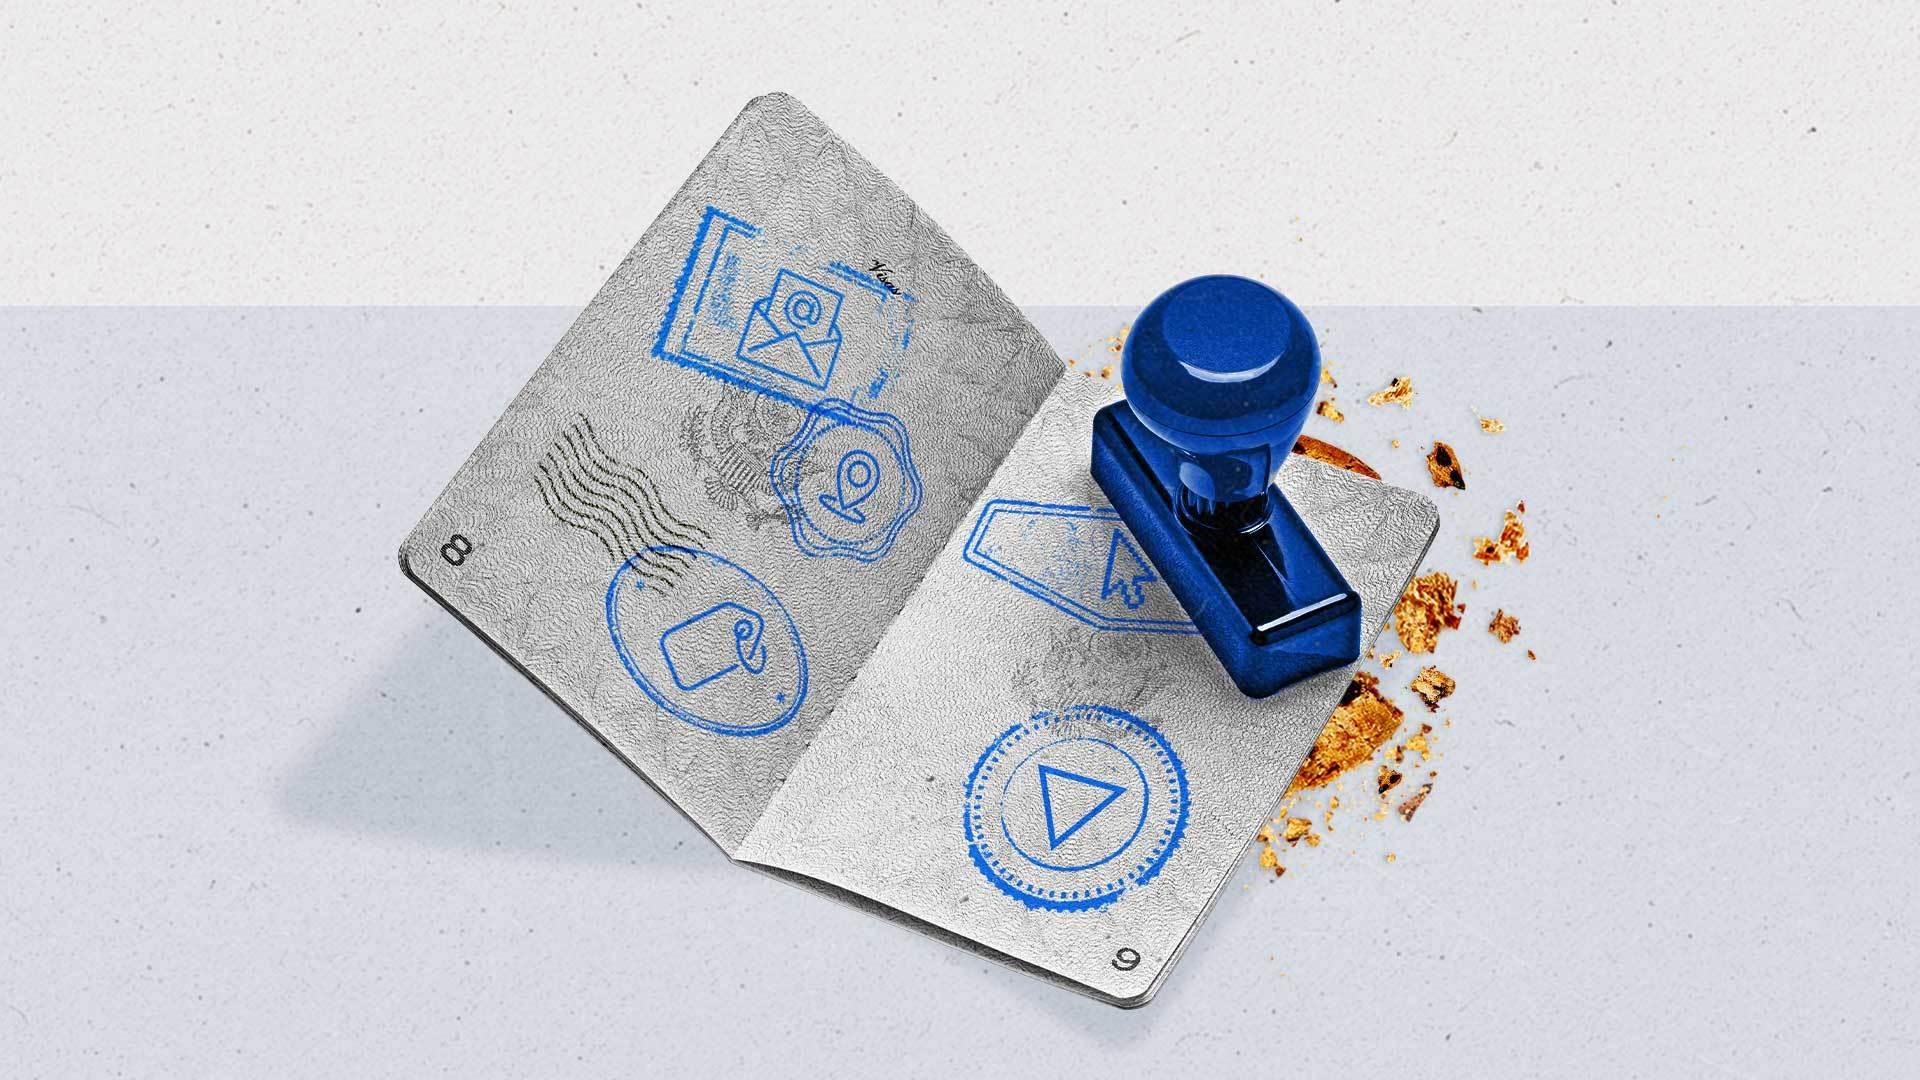 A stamper and a passport filled with various programmatic-related stamps sits atop a crushed cookie.